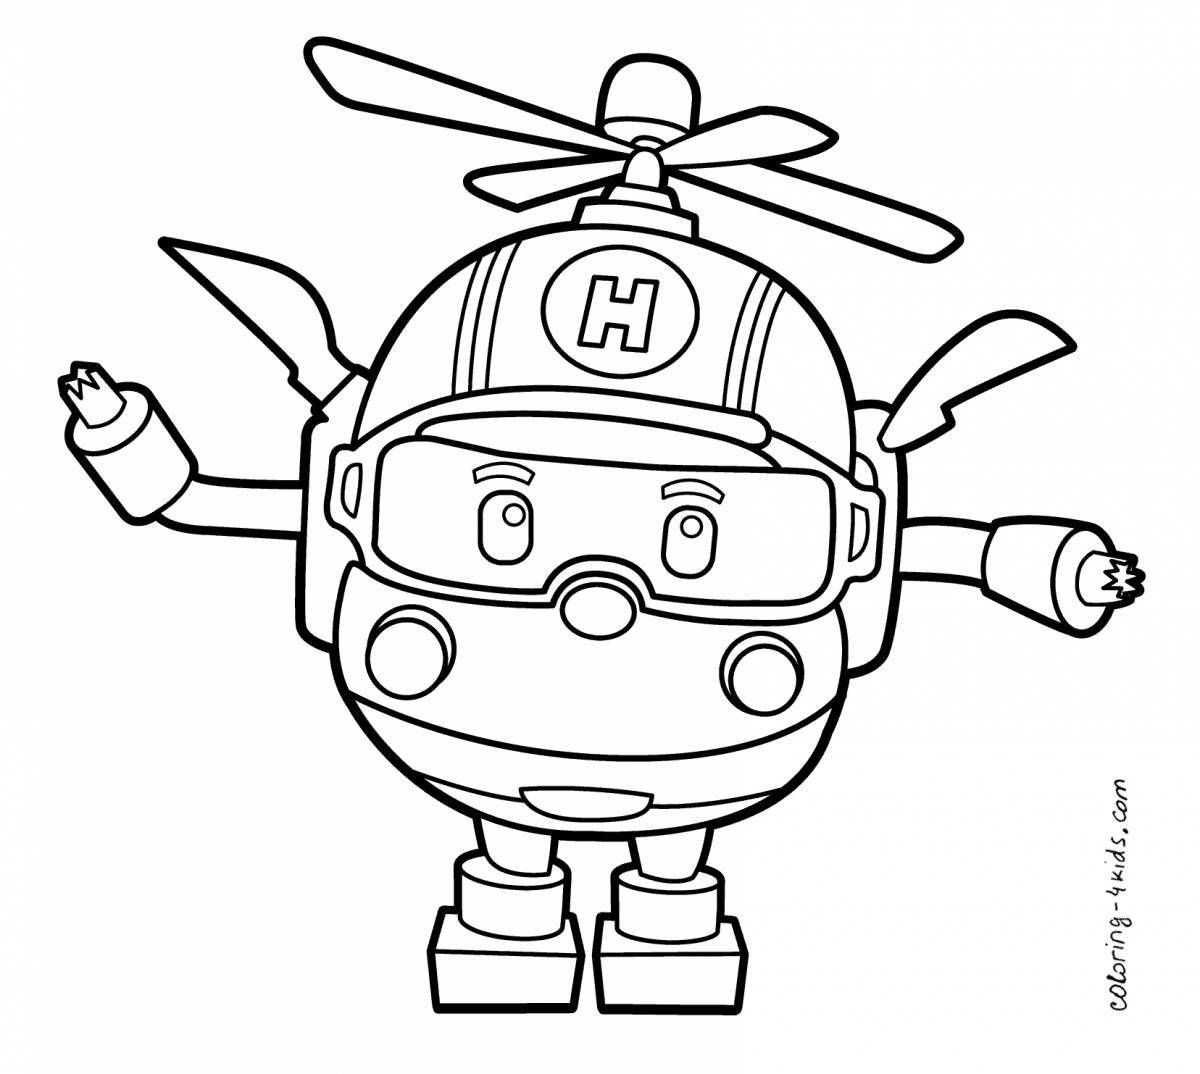 Bright poly robocar coloring book for kids